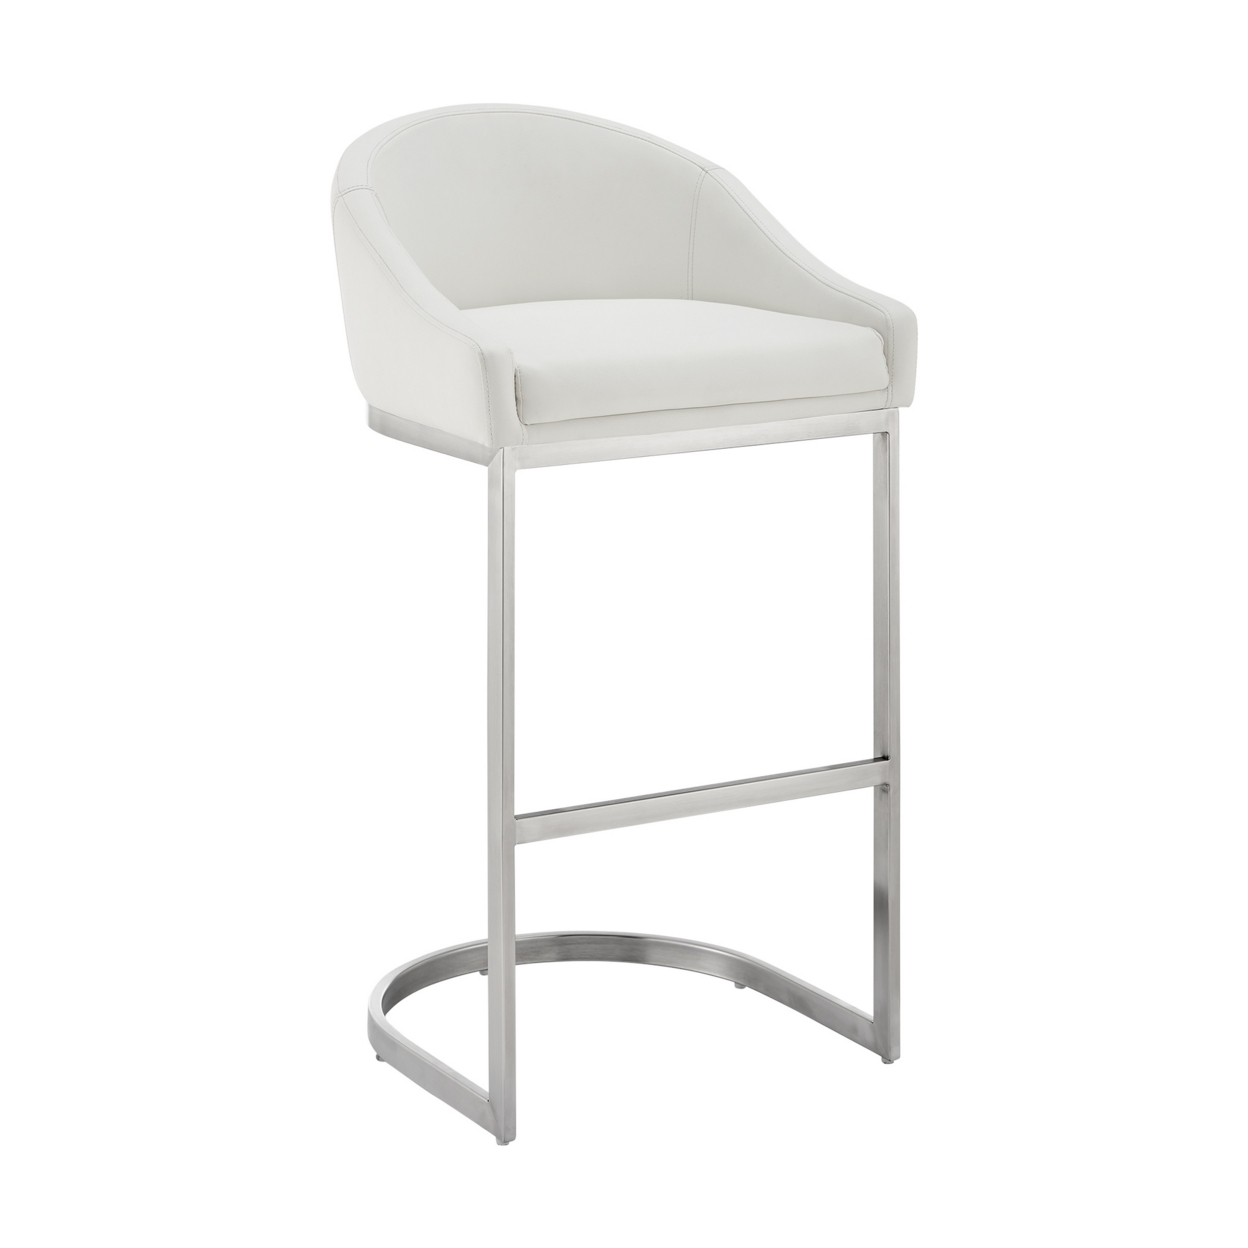 Lina 24 Inch Counter Stool Chair, Metal Cantilever Base, White Faux Leather- Saltoro Sherpi